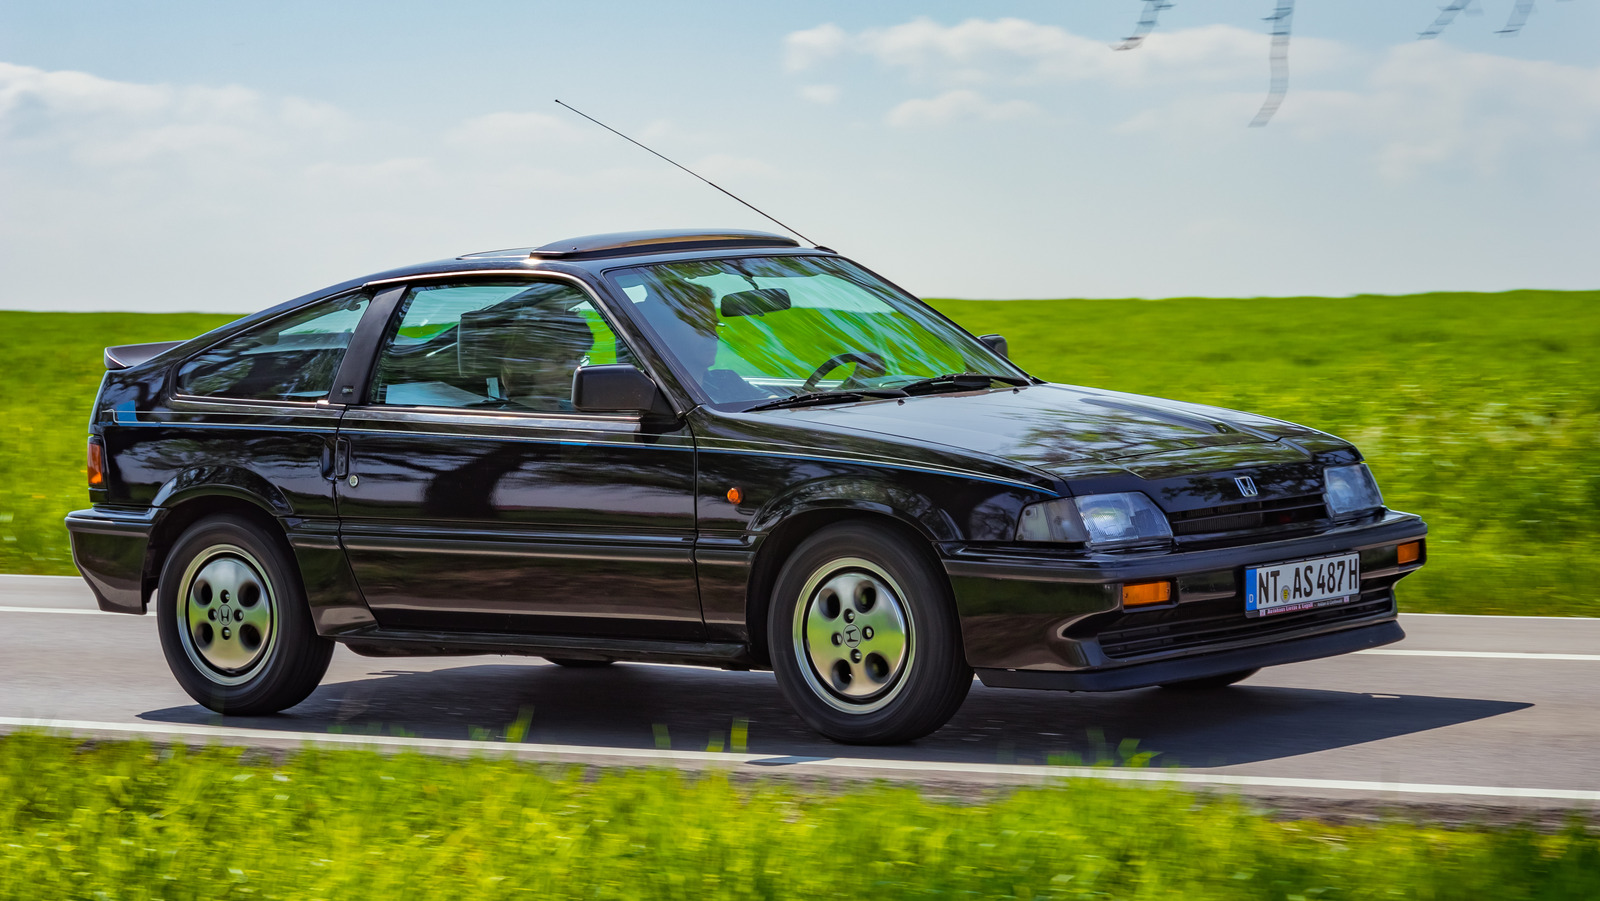 The 10 Coolest Features Of The Honda CRX